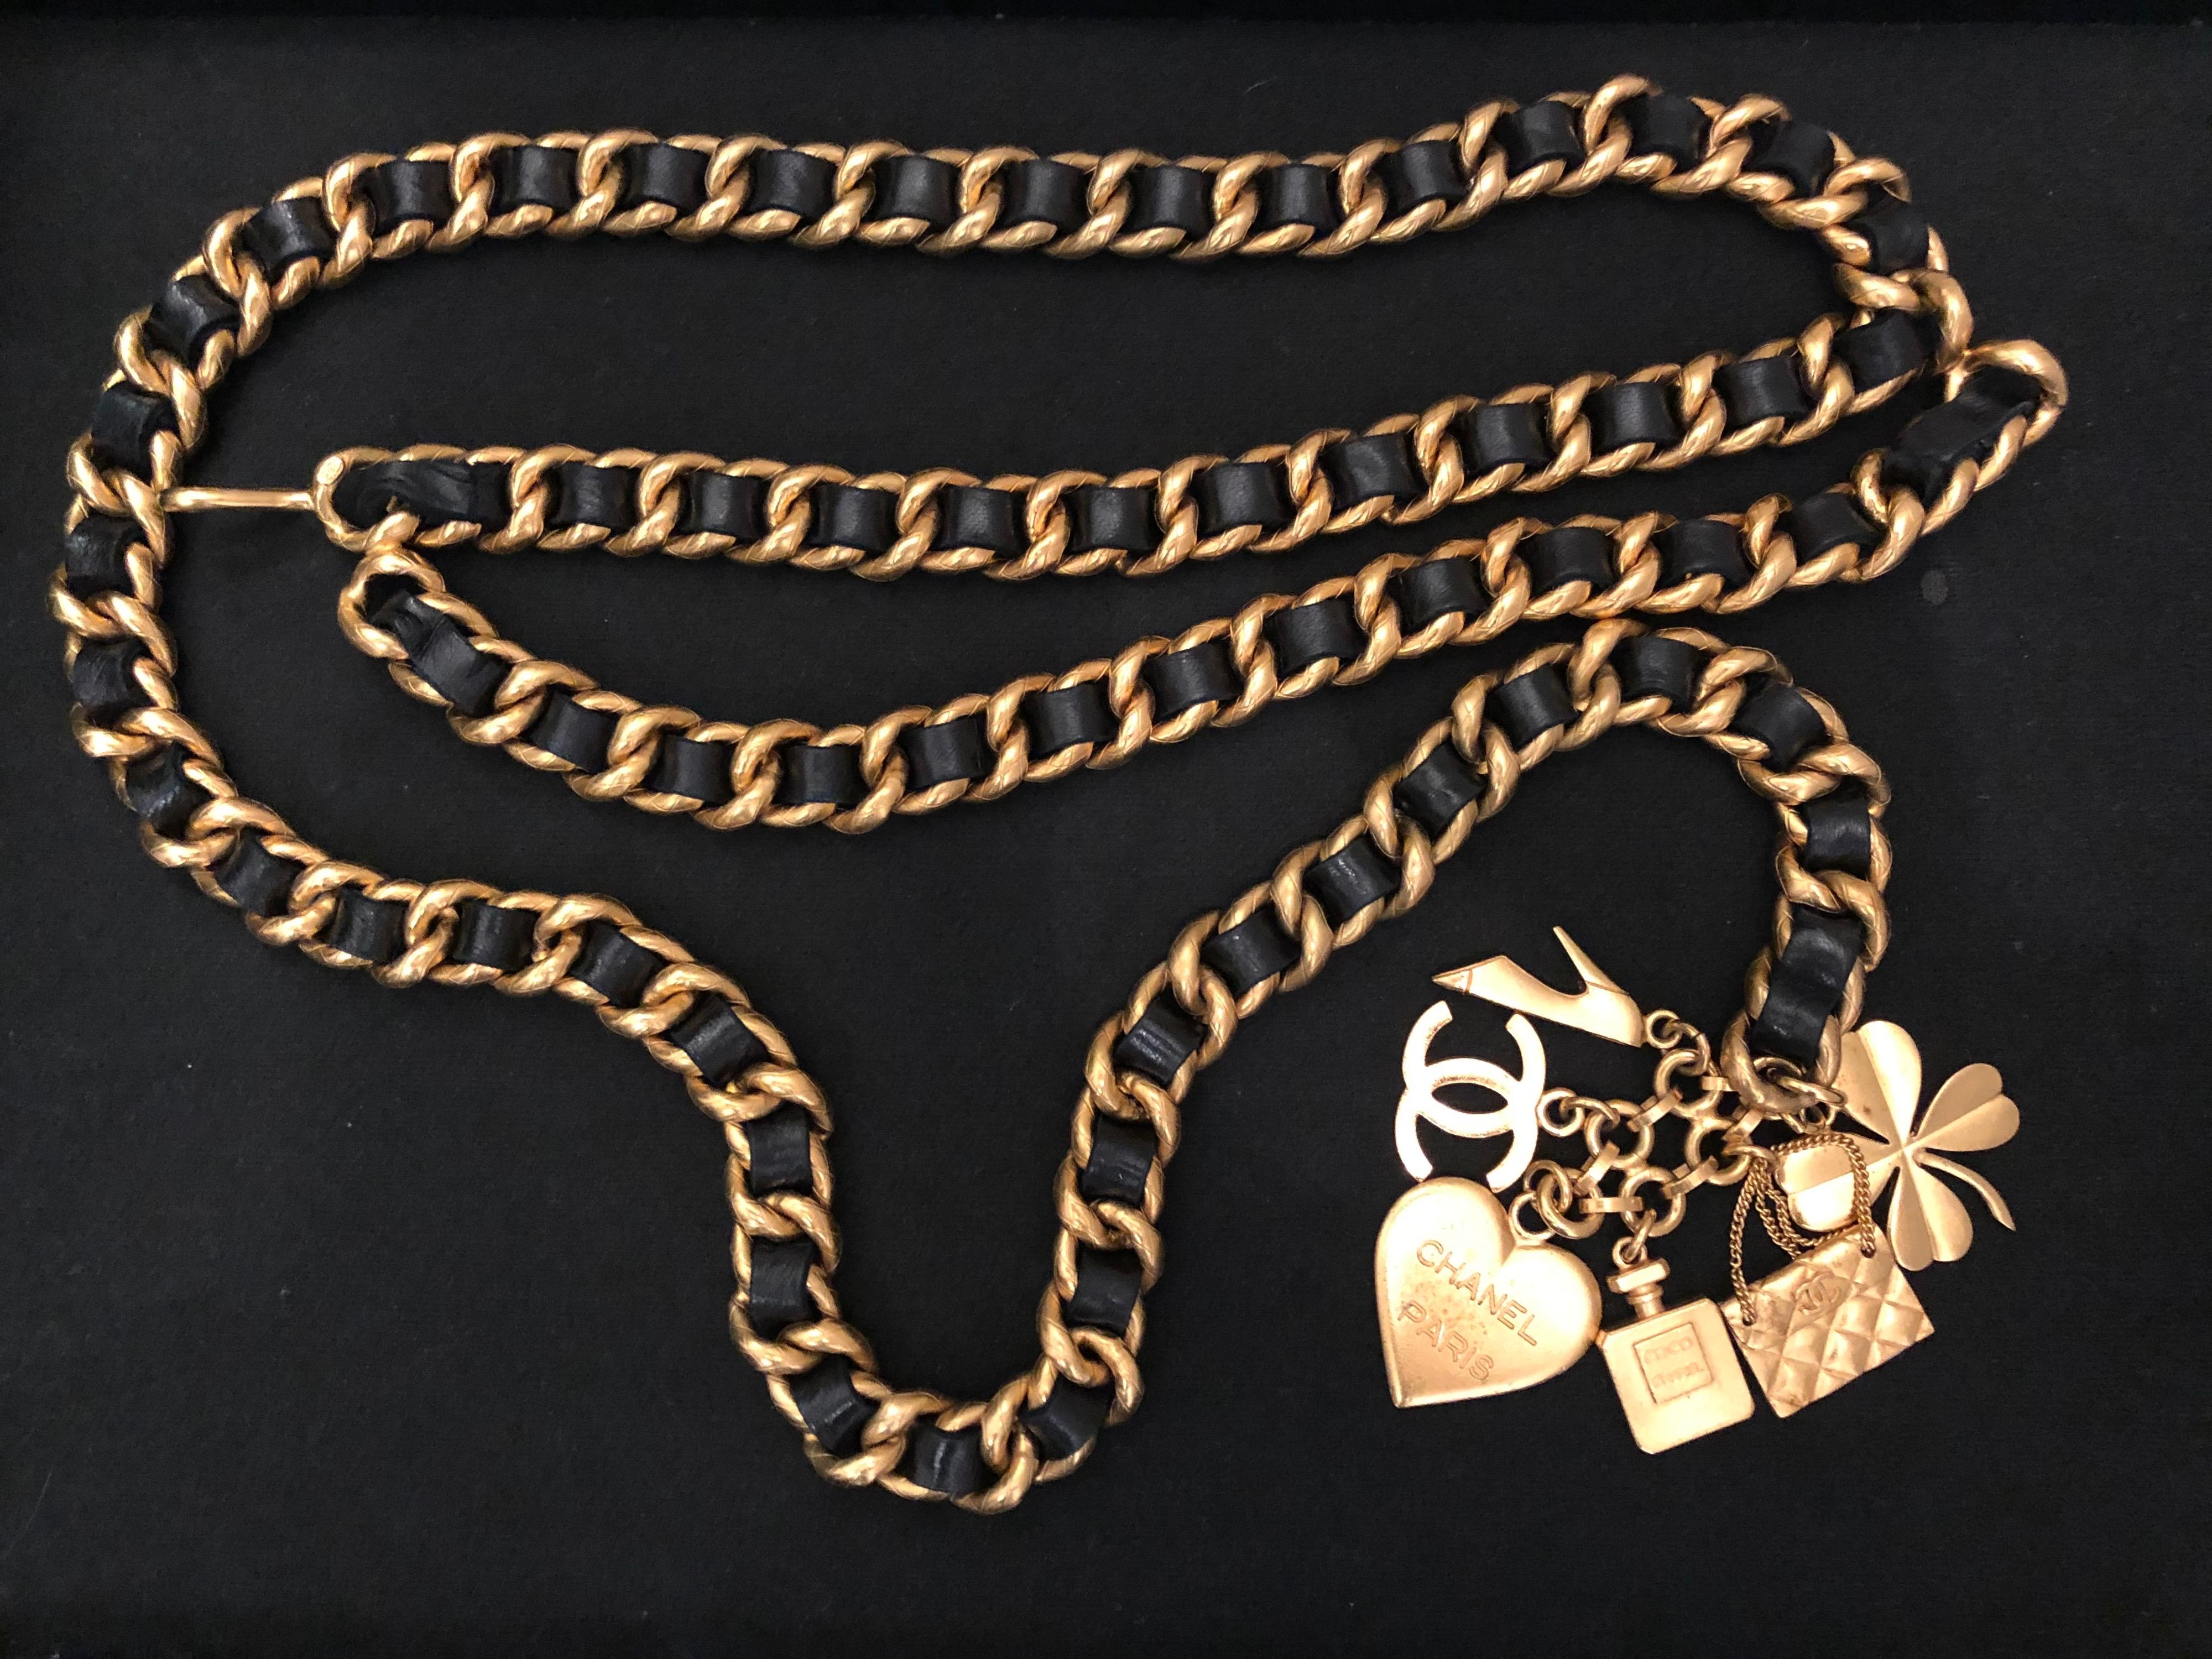 1990s Chanel gold toned chain belt interlaced with black leather featuring six iconic Chanel charms. Stamped Chanel 95A made in France. Adjustable hook fastening. Measures 101 cm in wearable length (excl. charm) chain 1.5 cm in width. Comes with